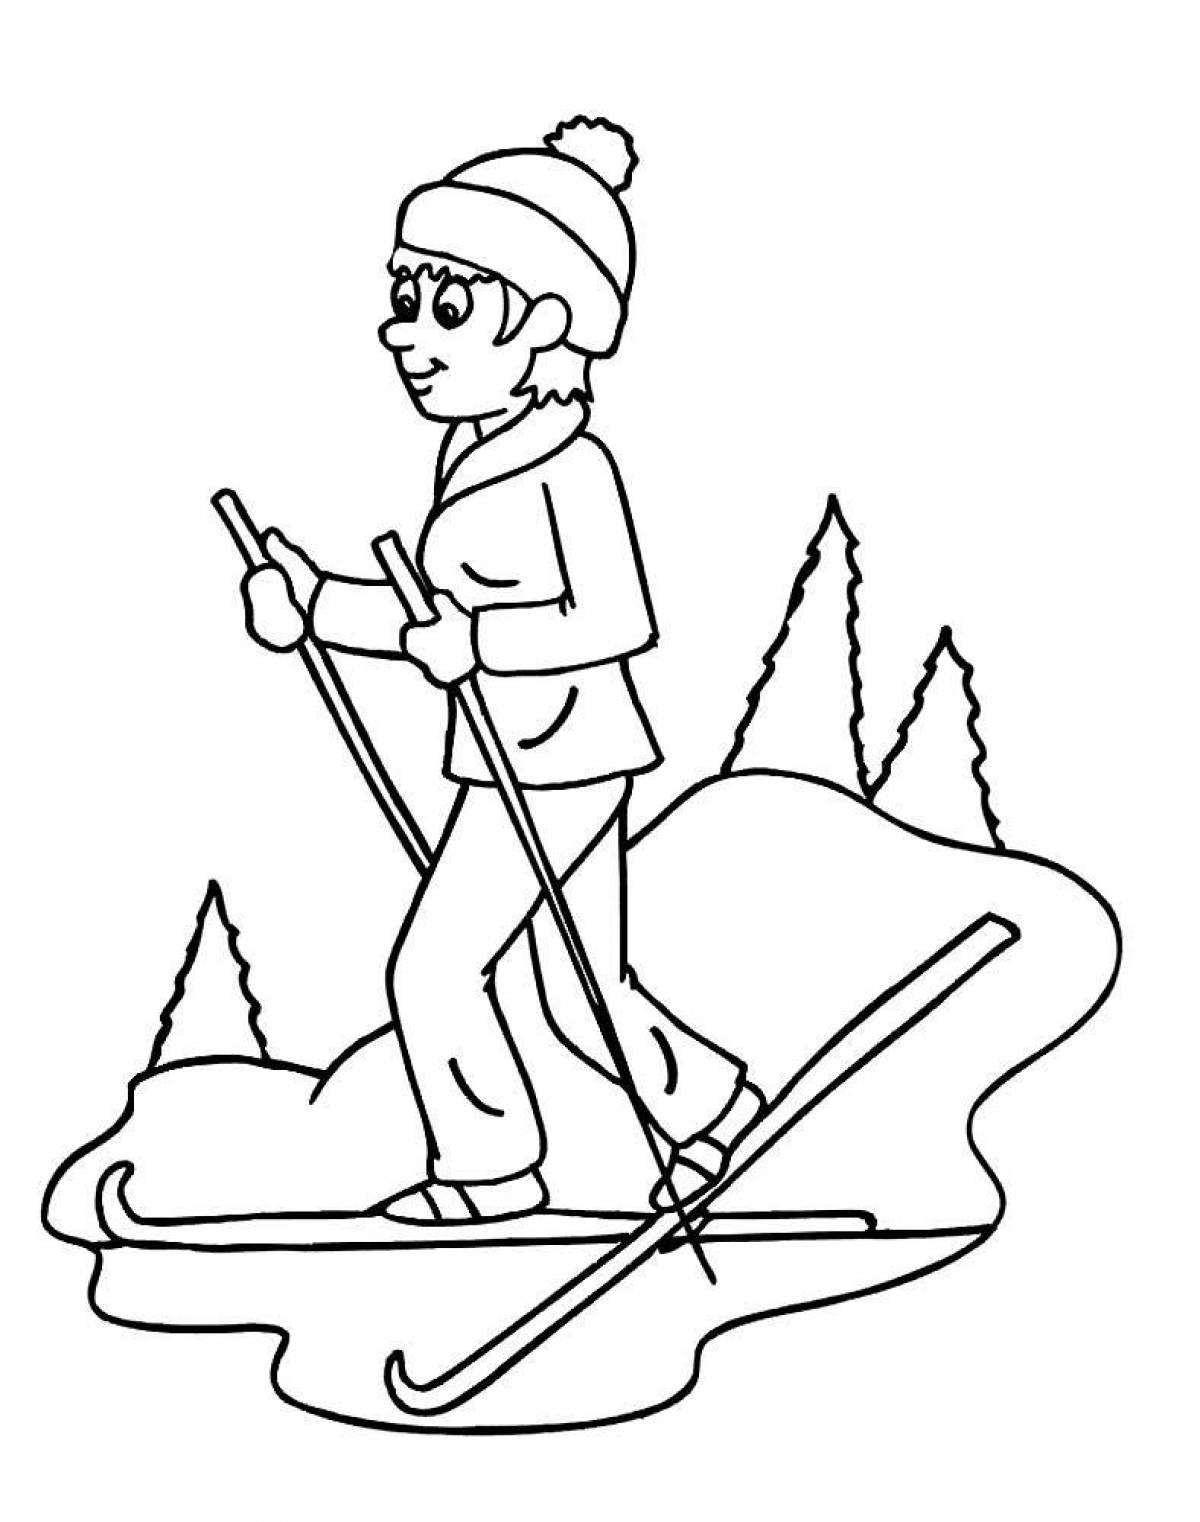 Colourful skier coloring page